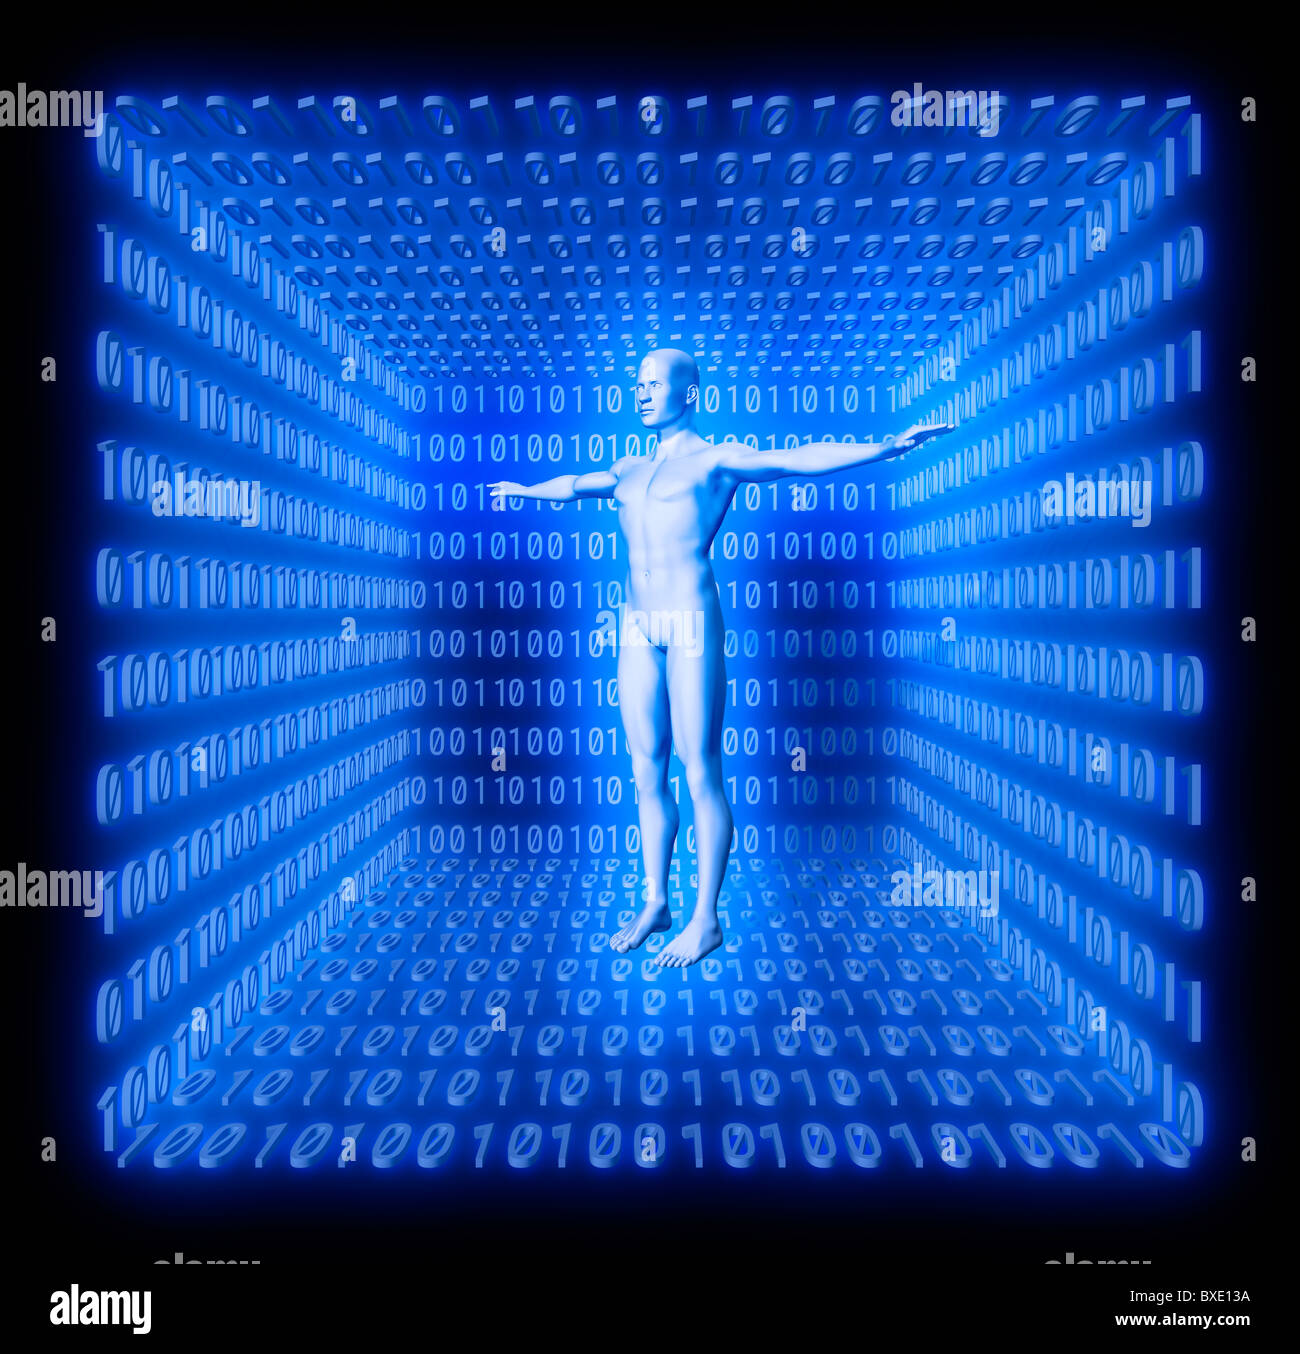 Man in blue room made of binary code. Concept of digital world, future world, avatar, artificiality etc. Stock Photo